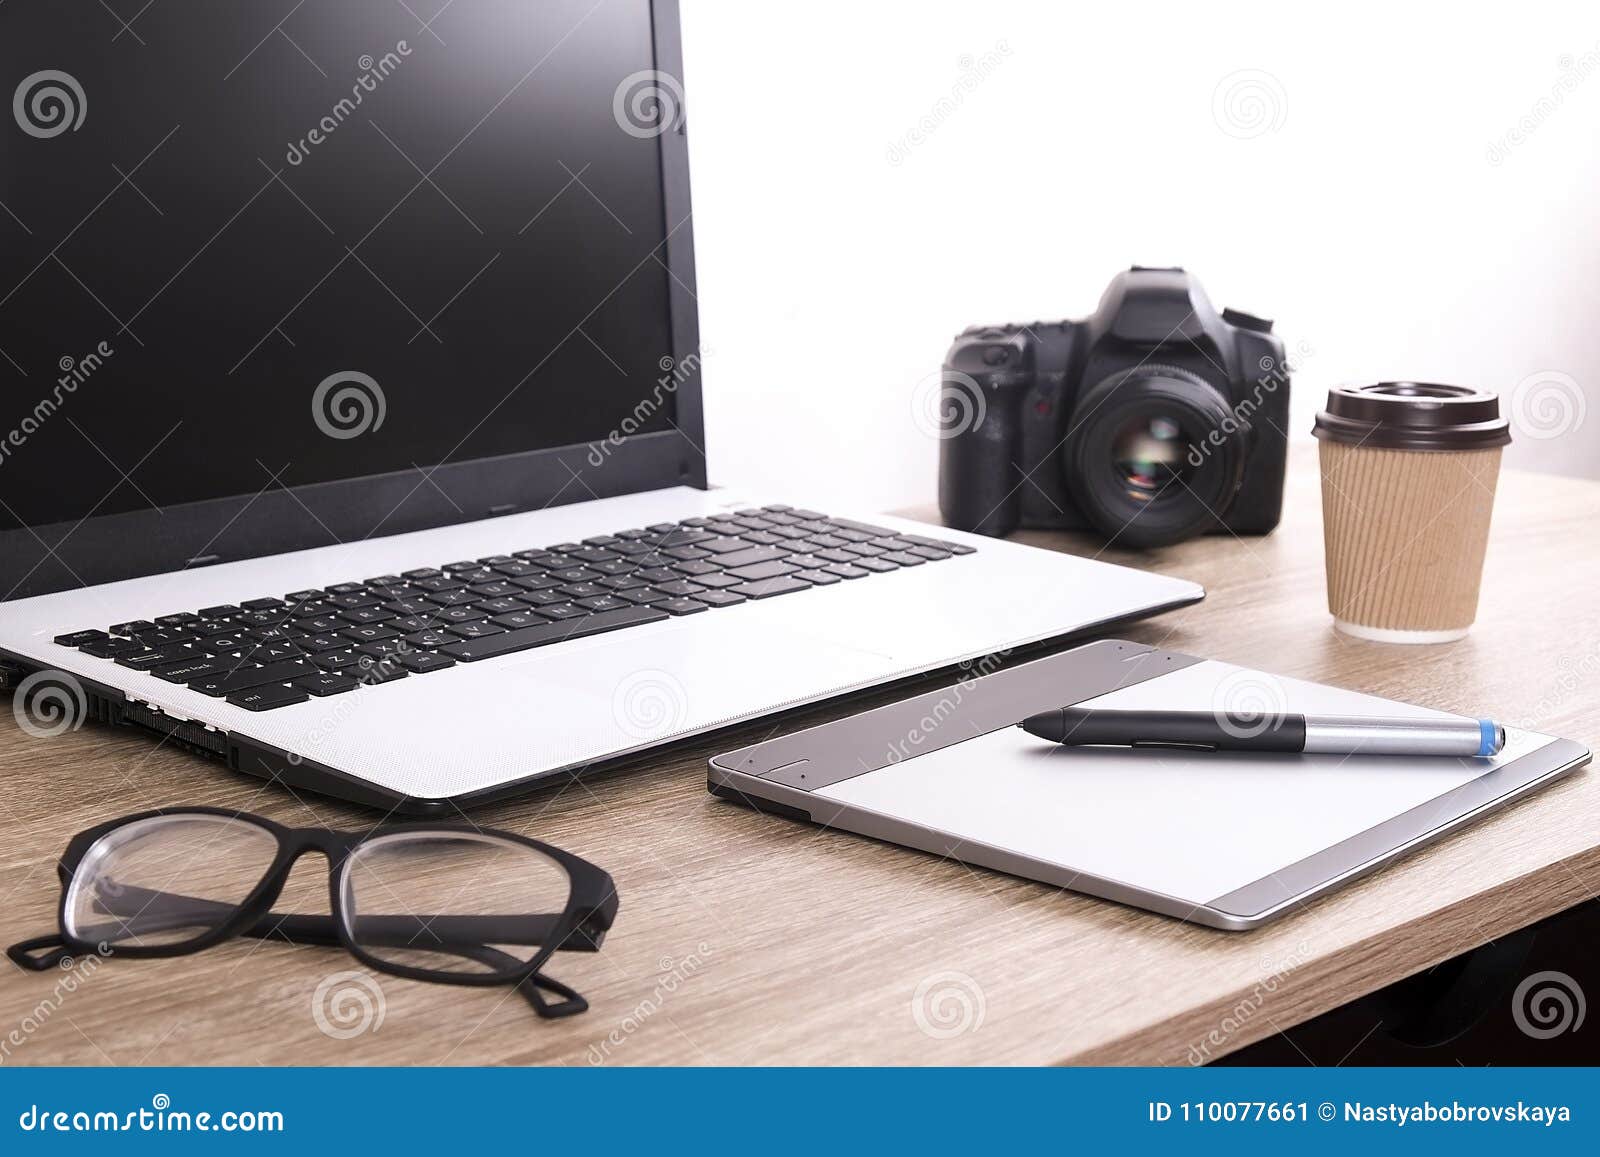 Photo Blogger Photographer It Specialist S Typical Office